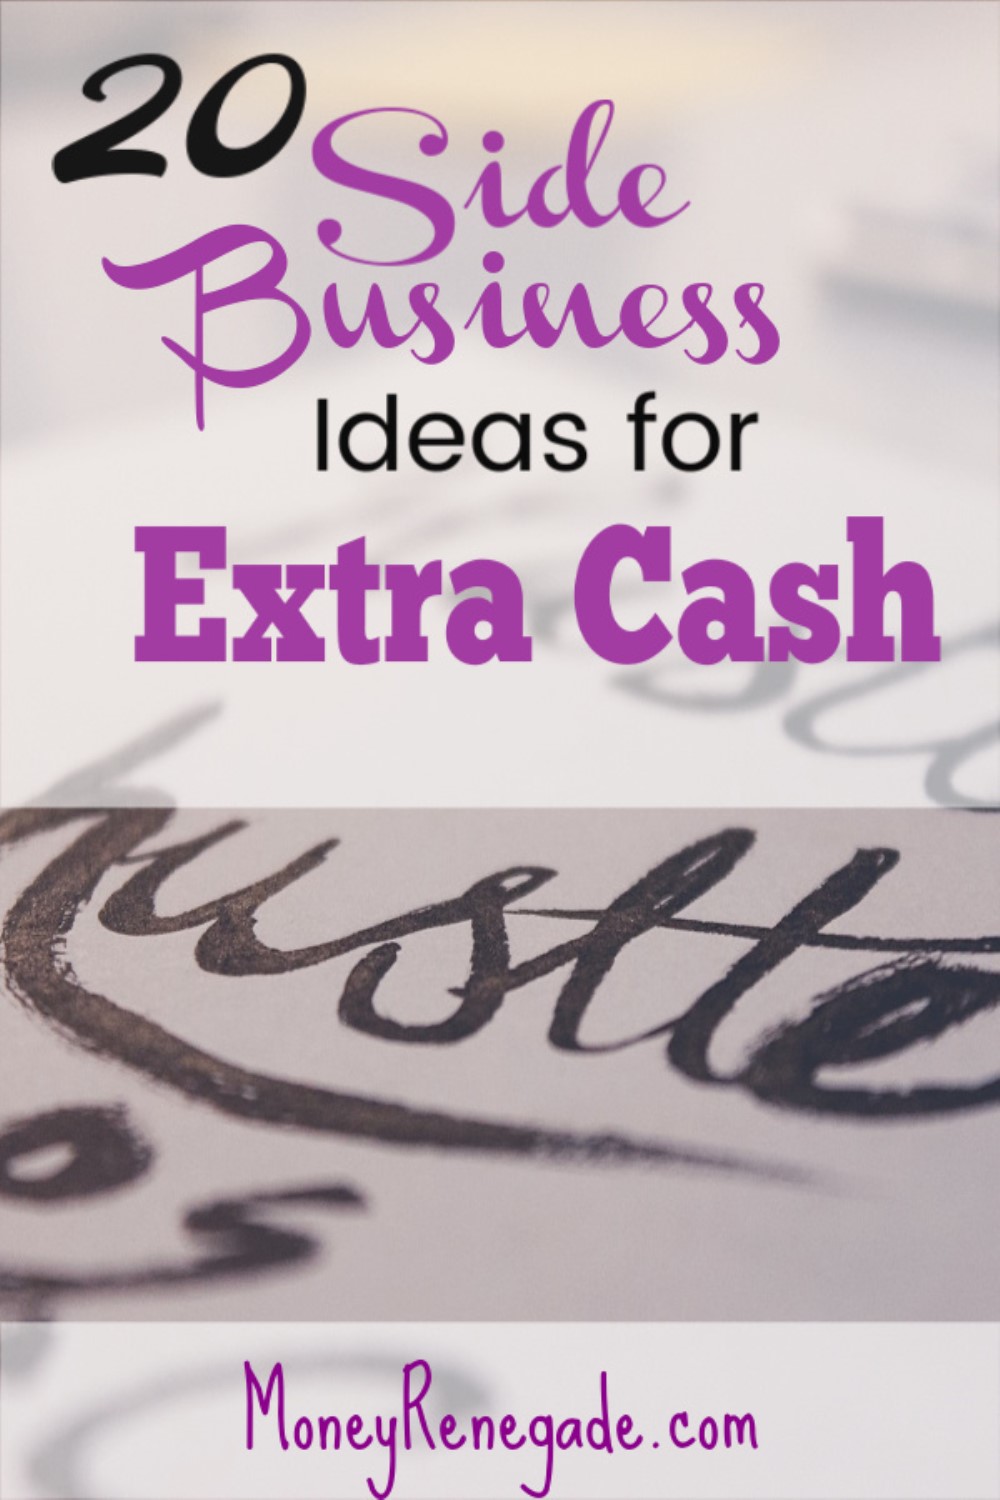 20 side business ideas for extra cash